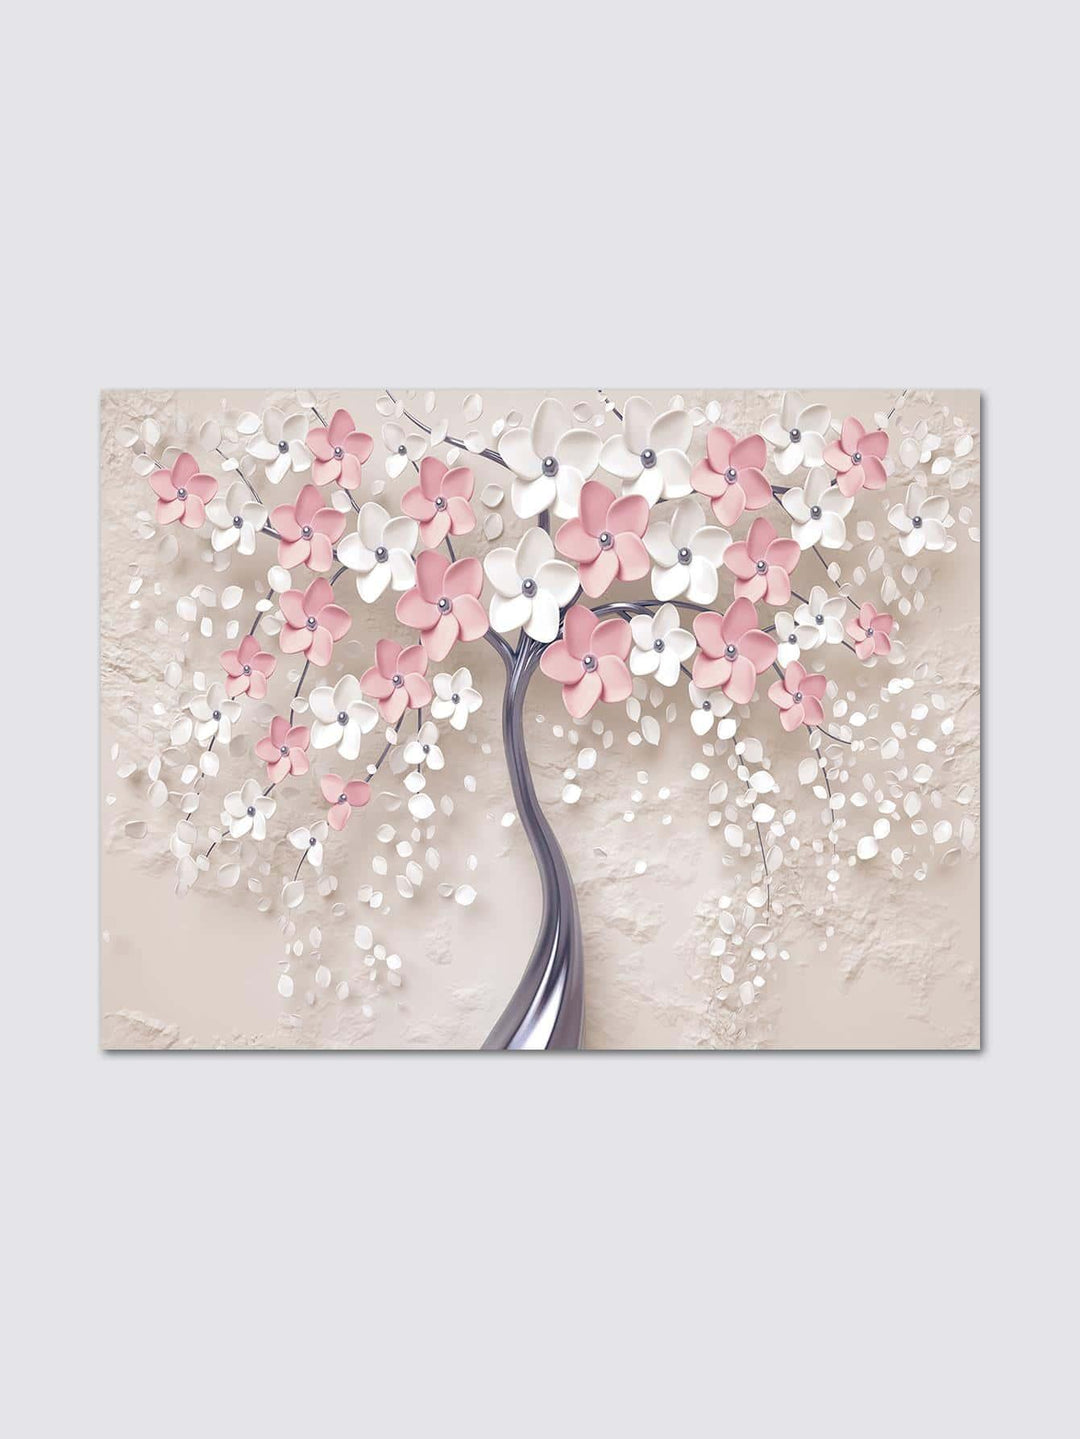 1pc Tree Pattern Unframed Painting Modern Chemical Fiber Unframed Picture For Home Decoration - Brand My Case